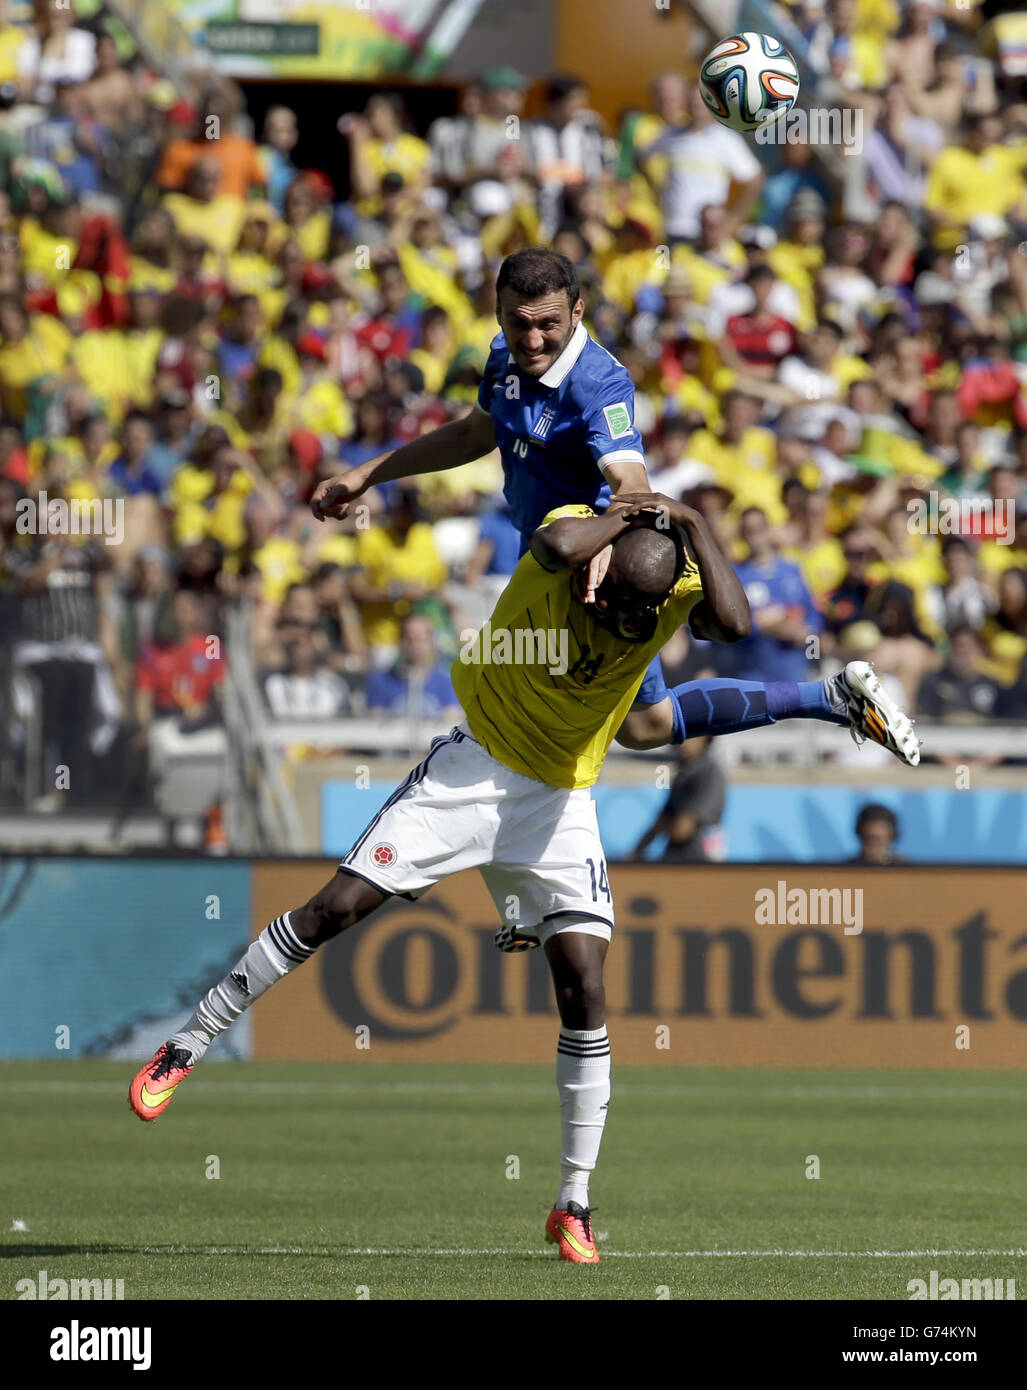 Greece's Vasilis Torosidis, top, heads the ball over Colombia's Victor Ibarbo during the group C World Cup soccer match between Colombia and Greece at the Mineirao Stadium in Belo Horizonte, Brazil, Saturday, June 14, 2014. (AP Photo/Fernando Vergara) Stock Photo